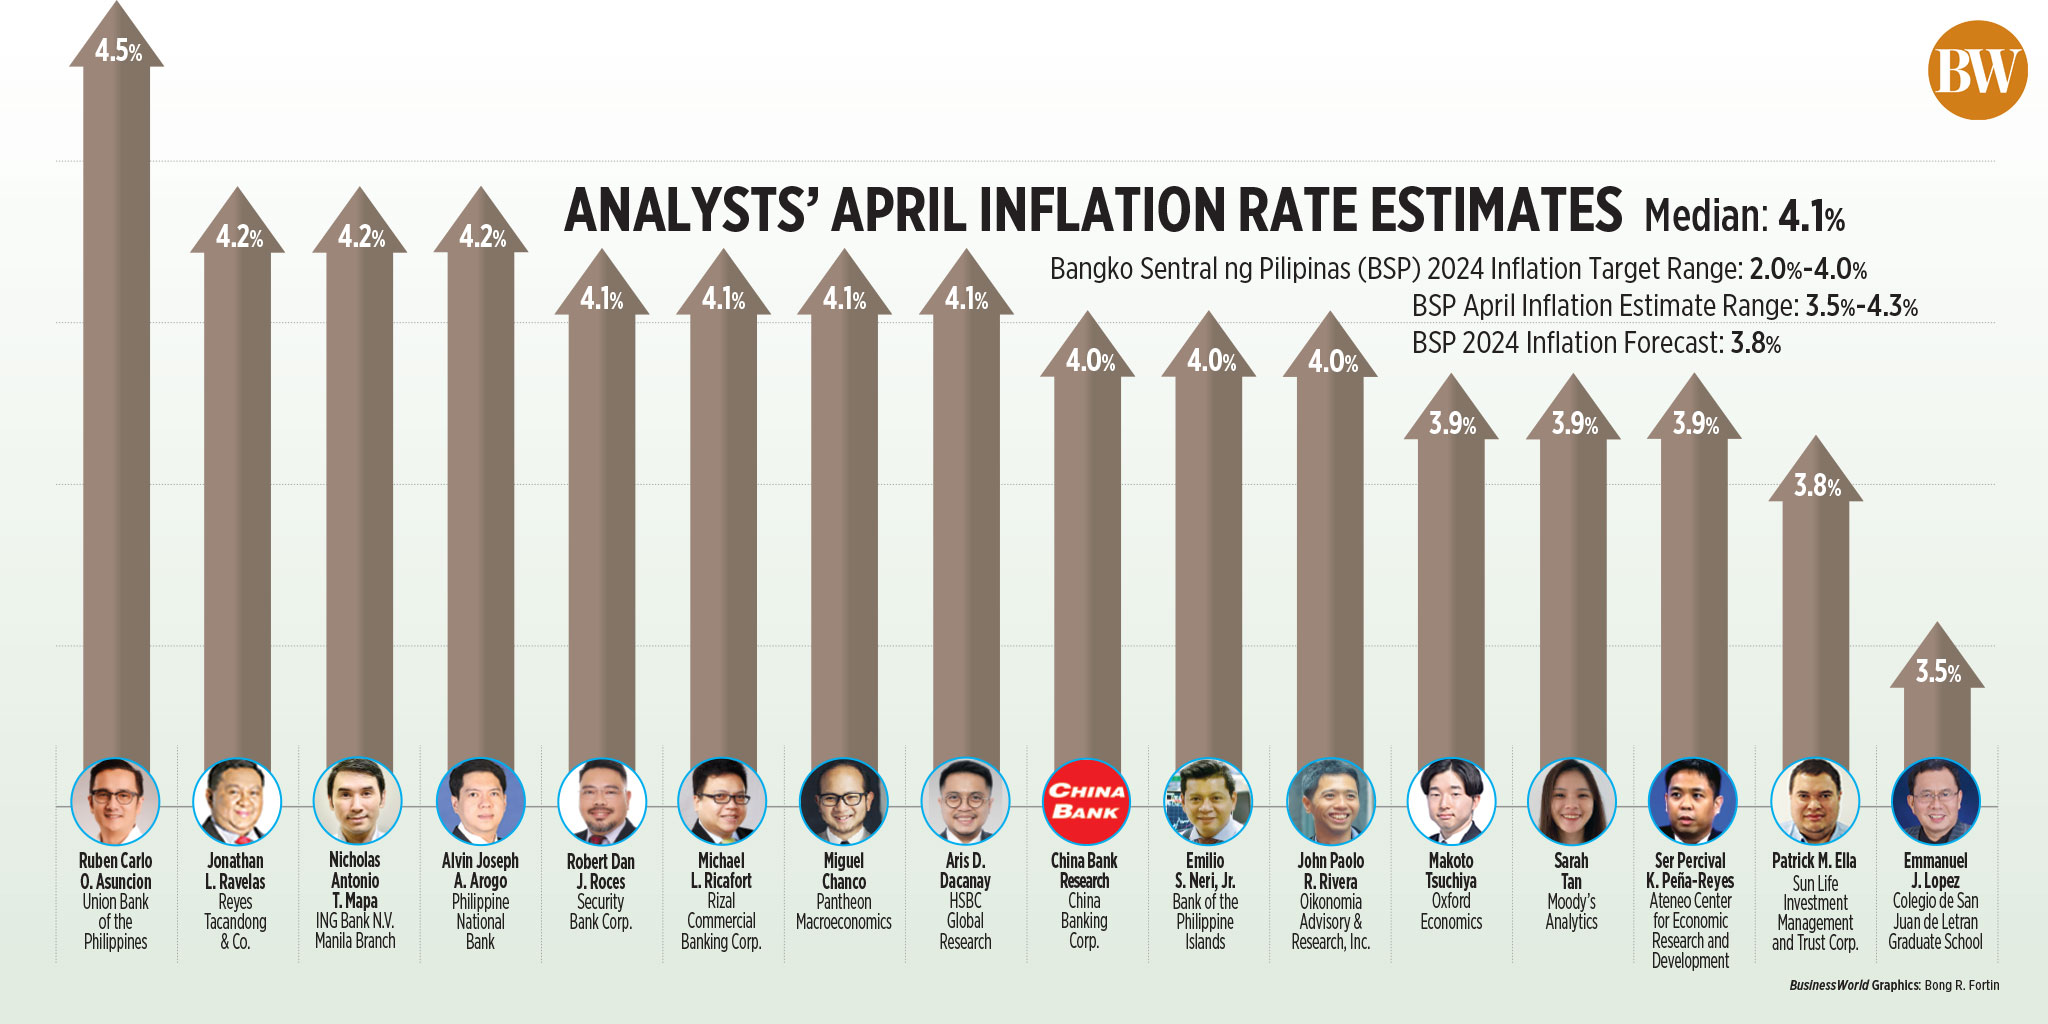 Analysts’ April inflation rate estimates